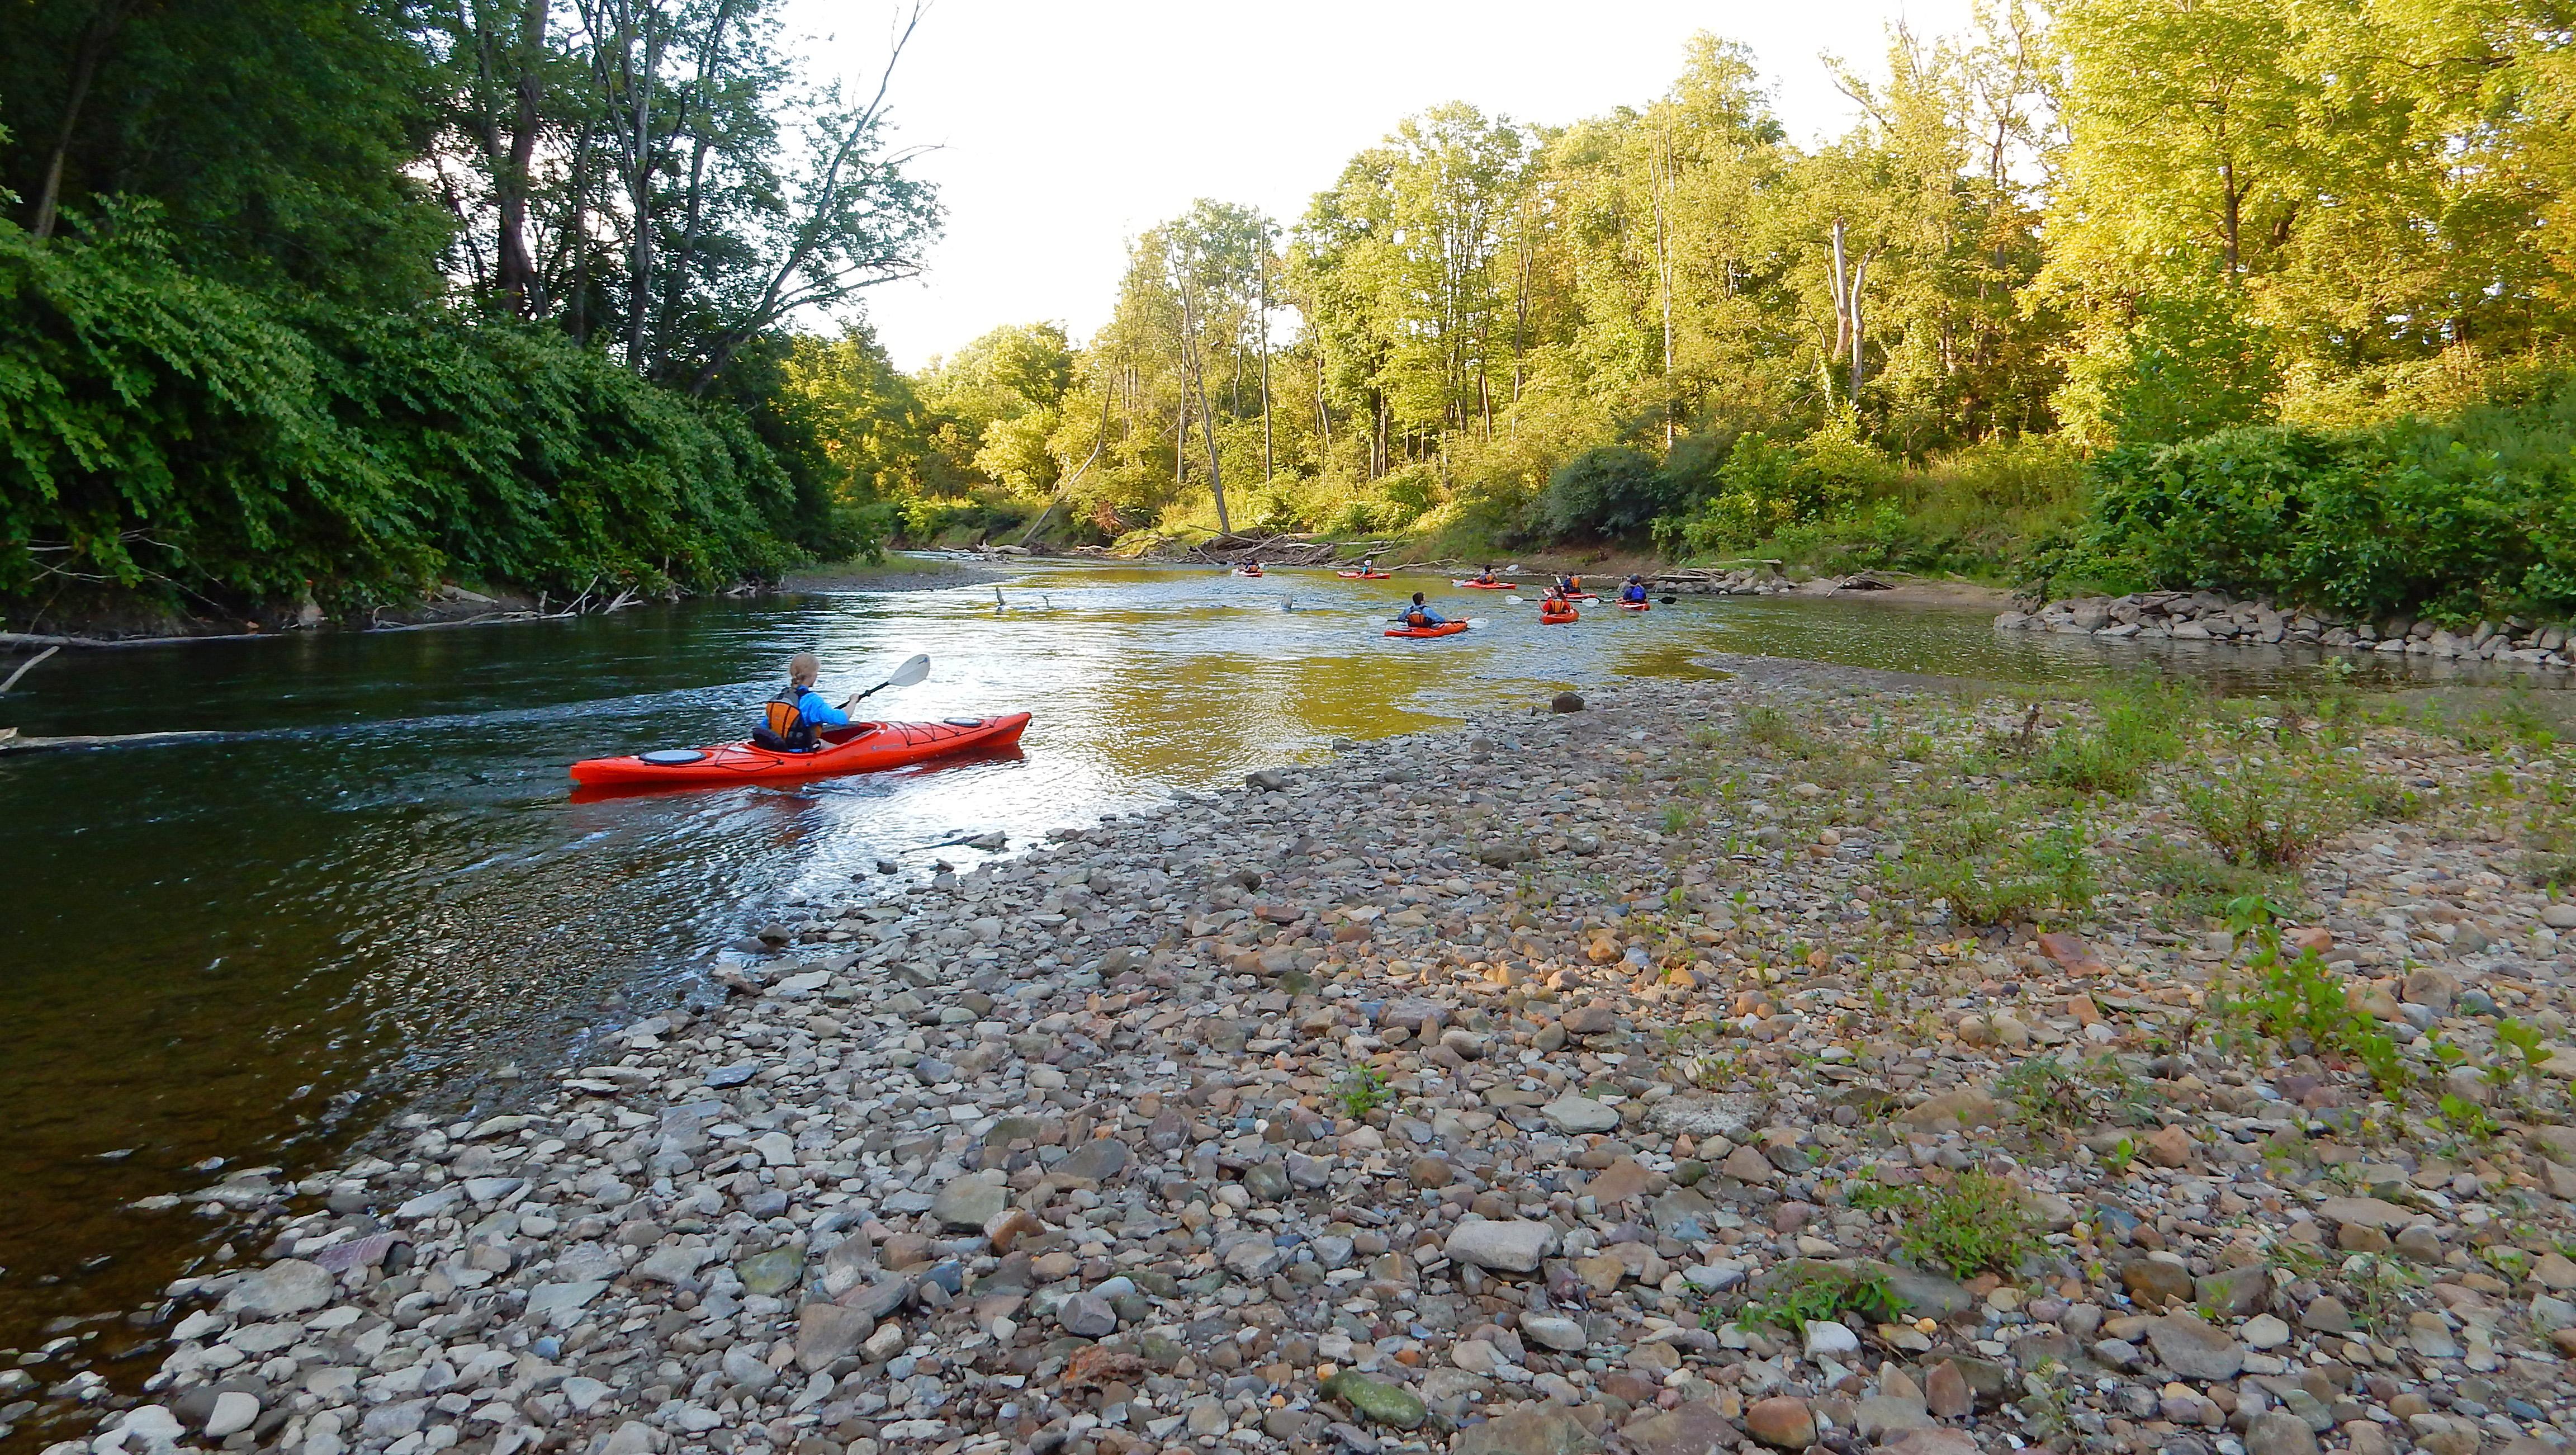 Kayakers on the Cuyahoga River